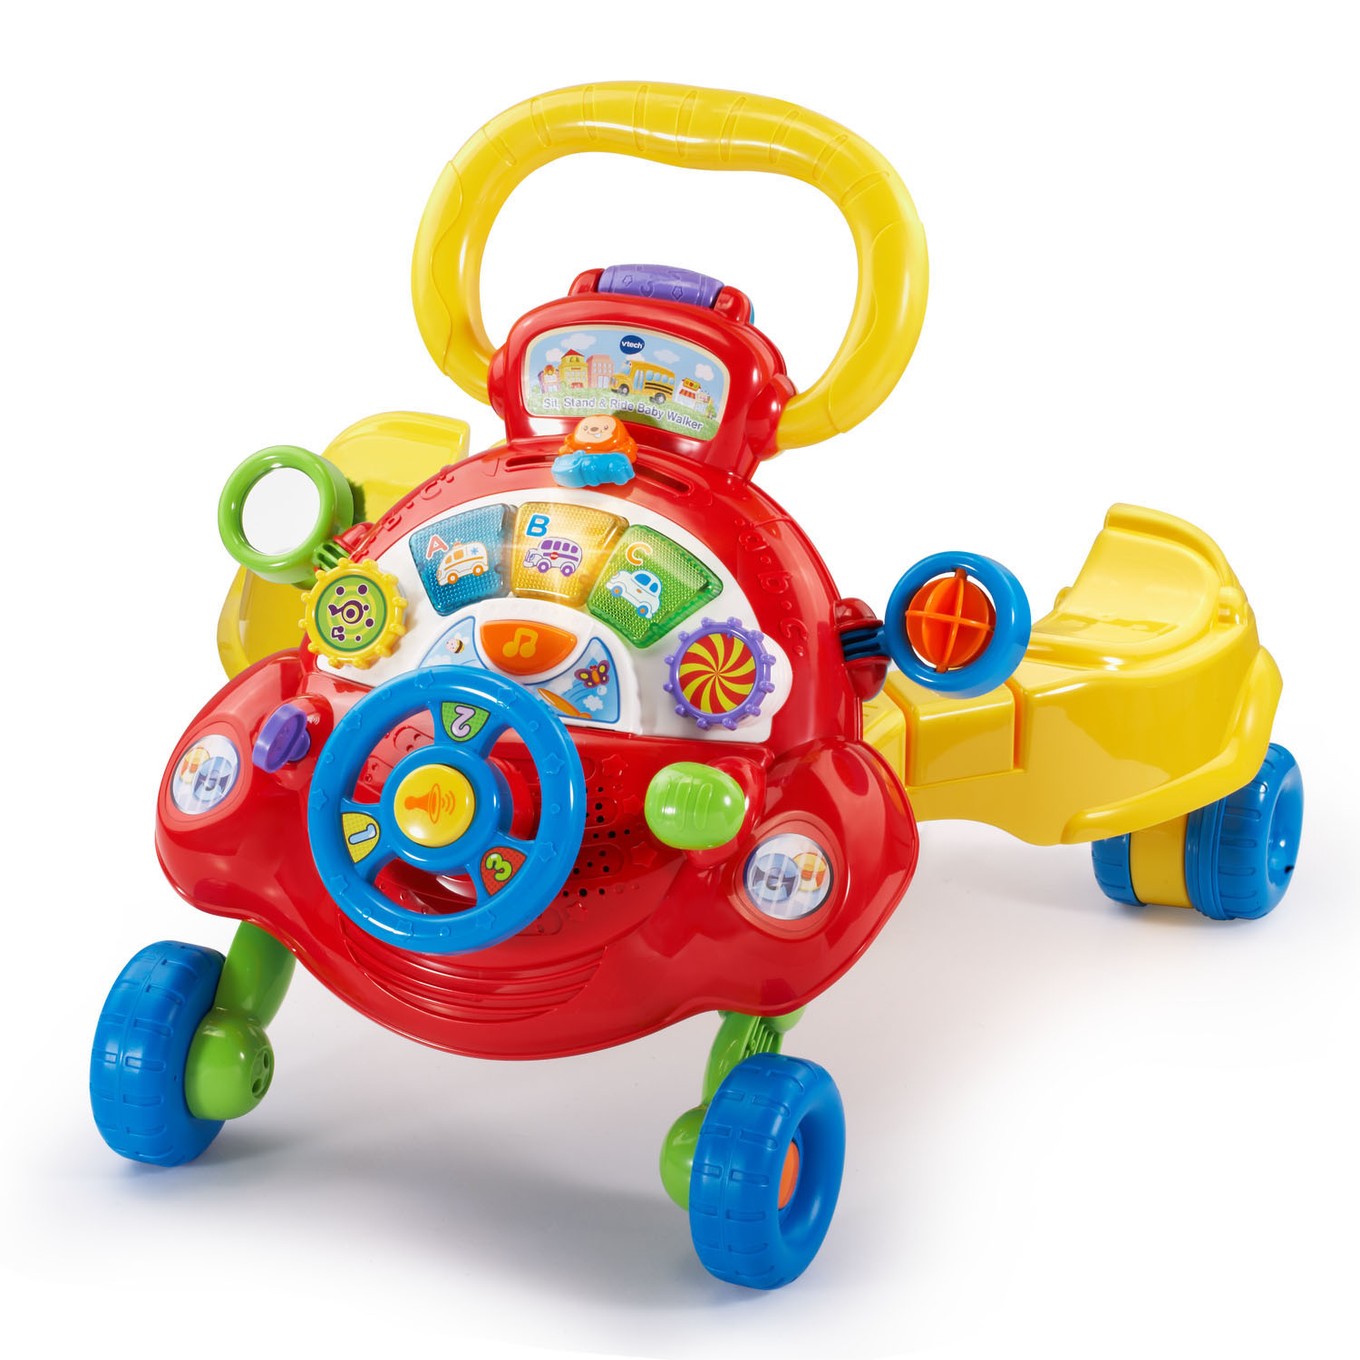 vtech 3 in 1 ride on